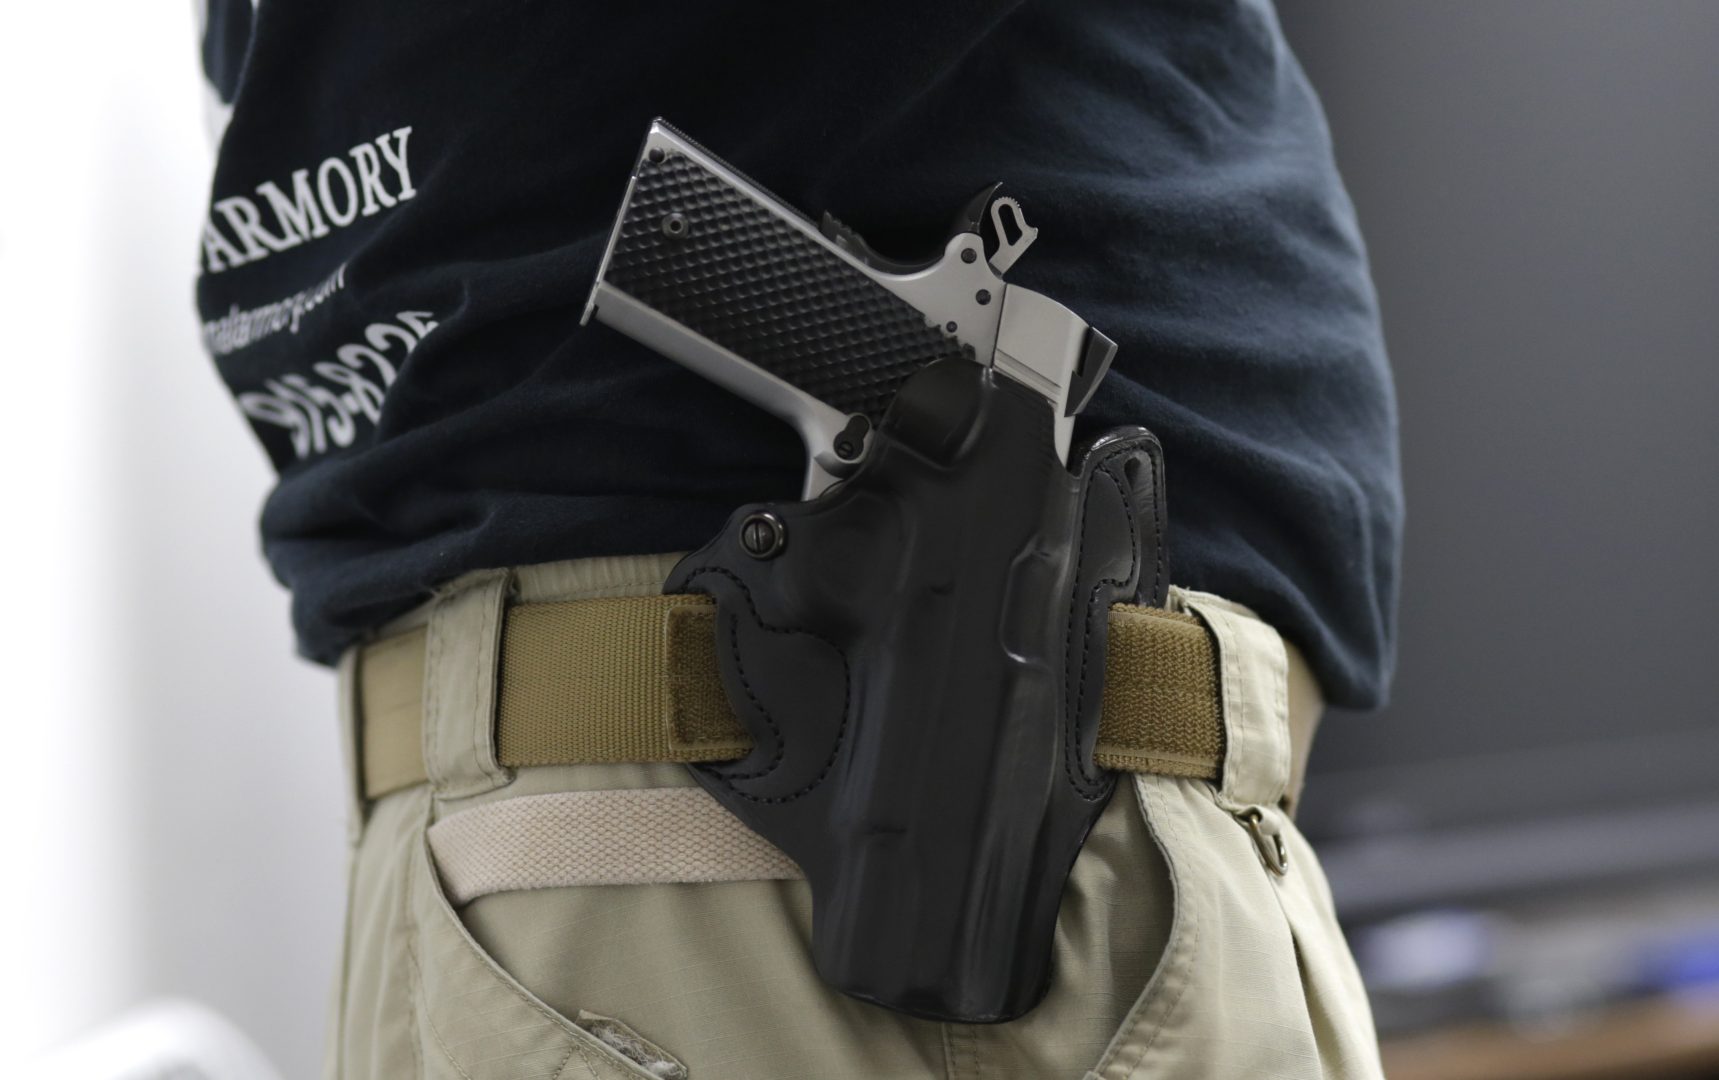 gun concealed carry 1 1719x1080.